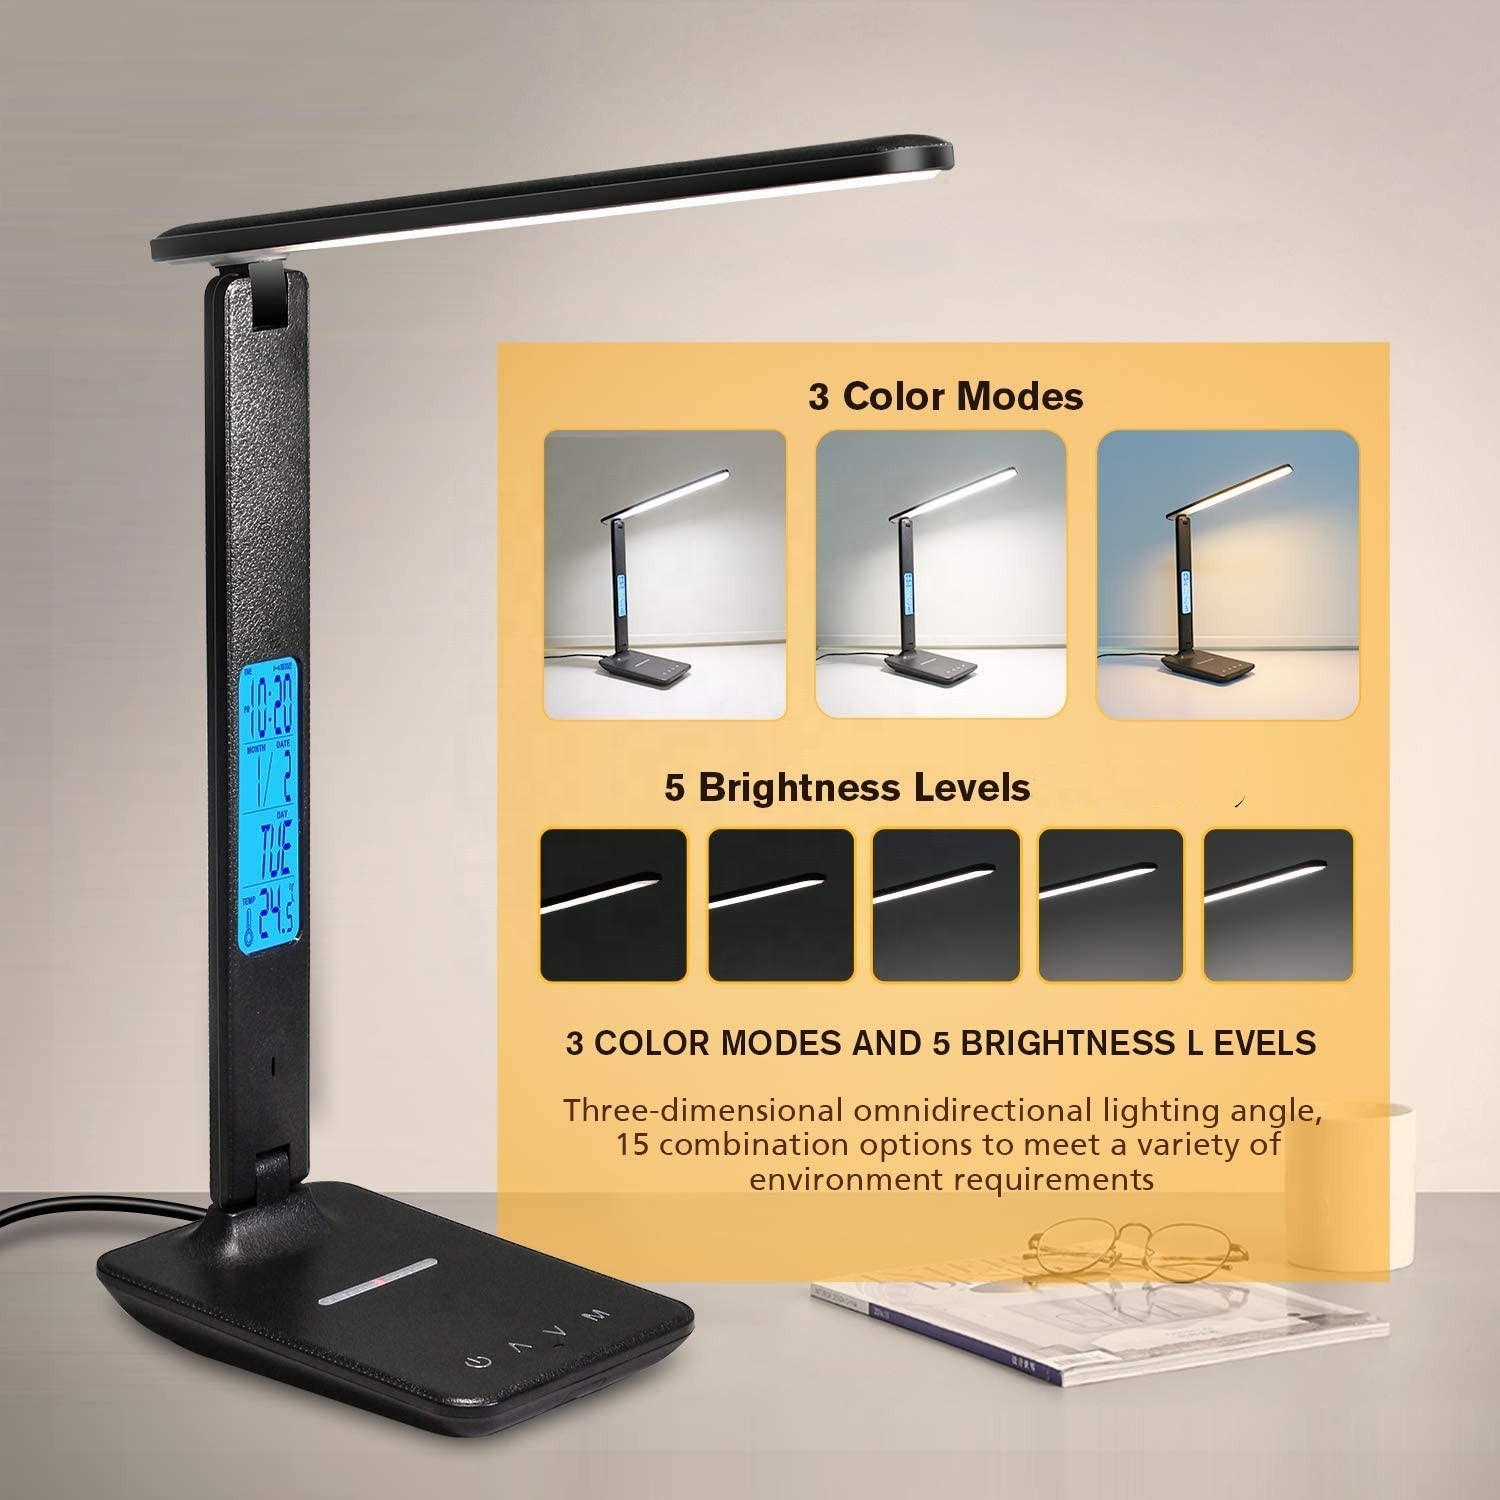 HHTCX26 Hot Selling Led Luxury Display 3 in 1 Wireless Charger Table Lamp Wireless Earbuds With USB Port Lamps Home Decor Luxury